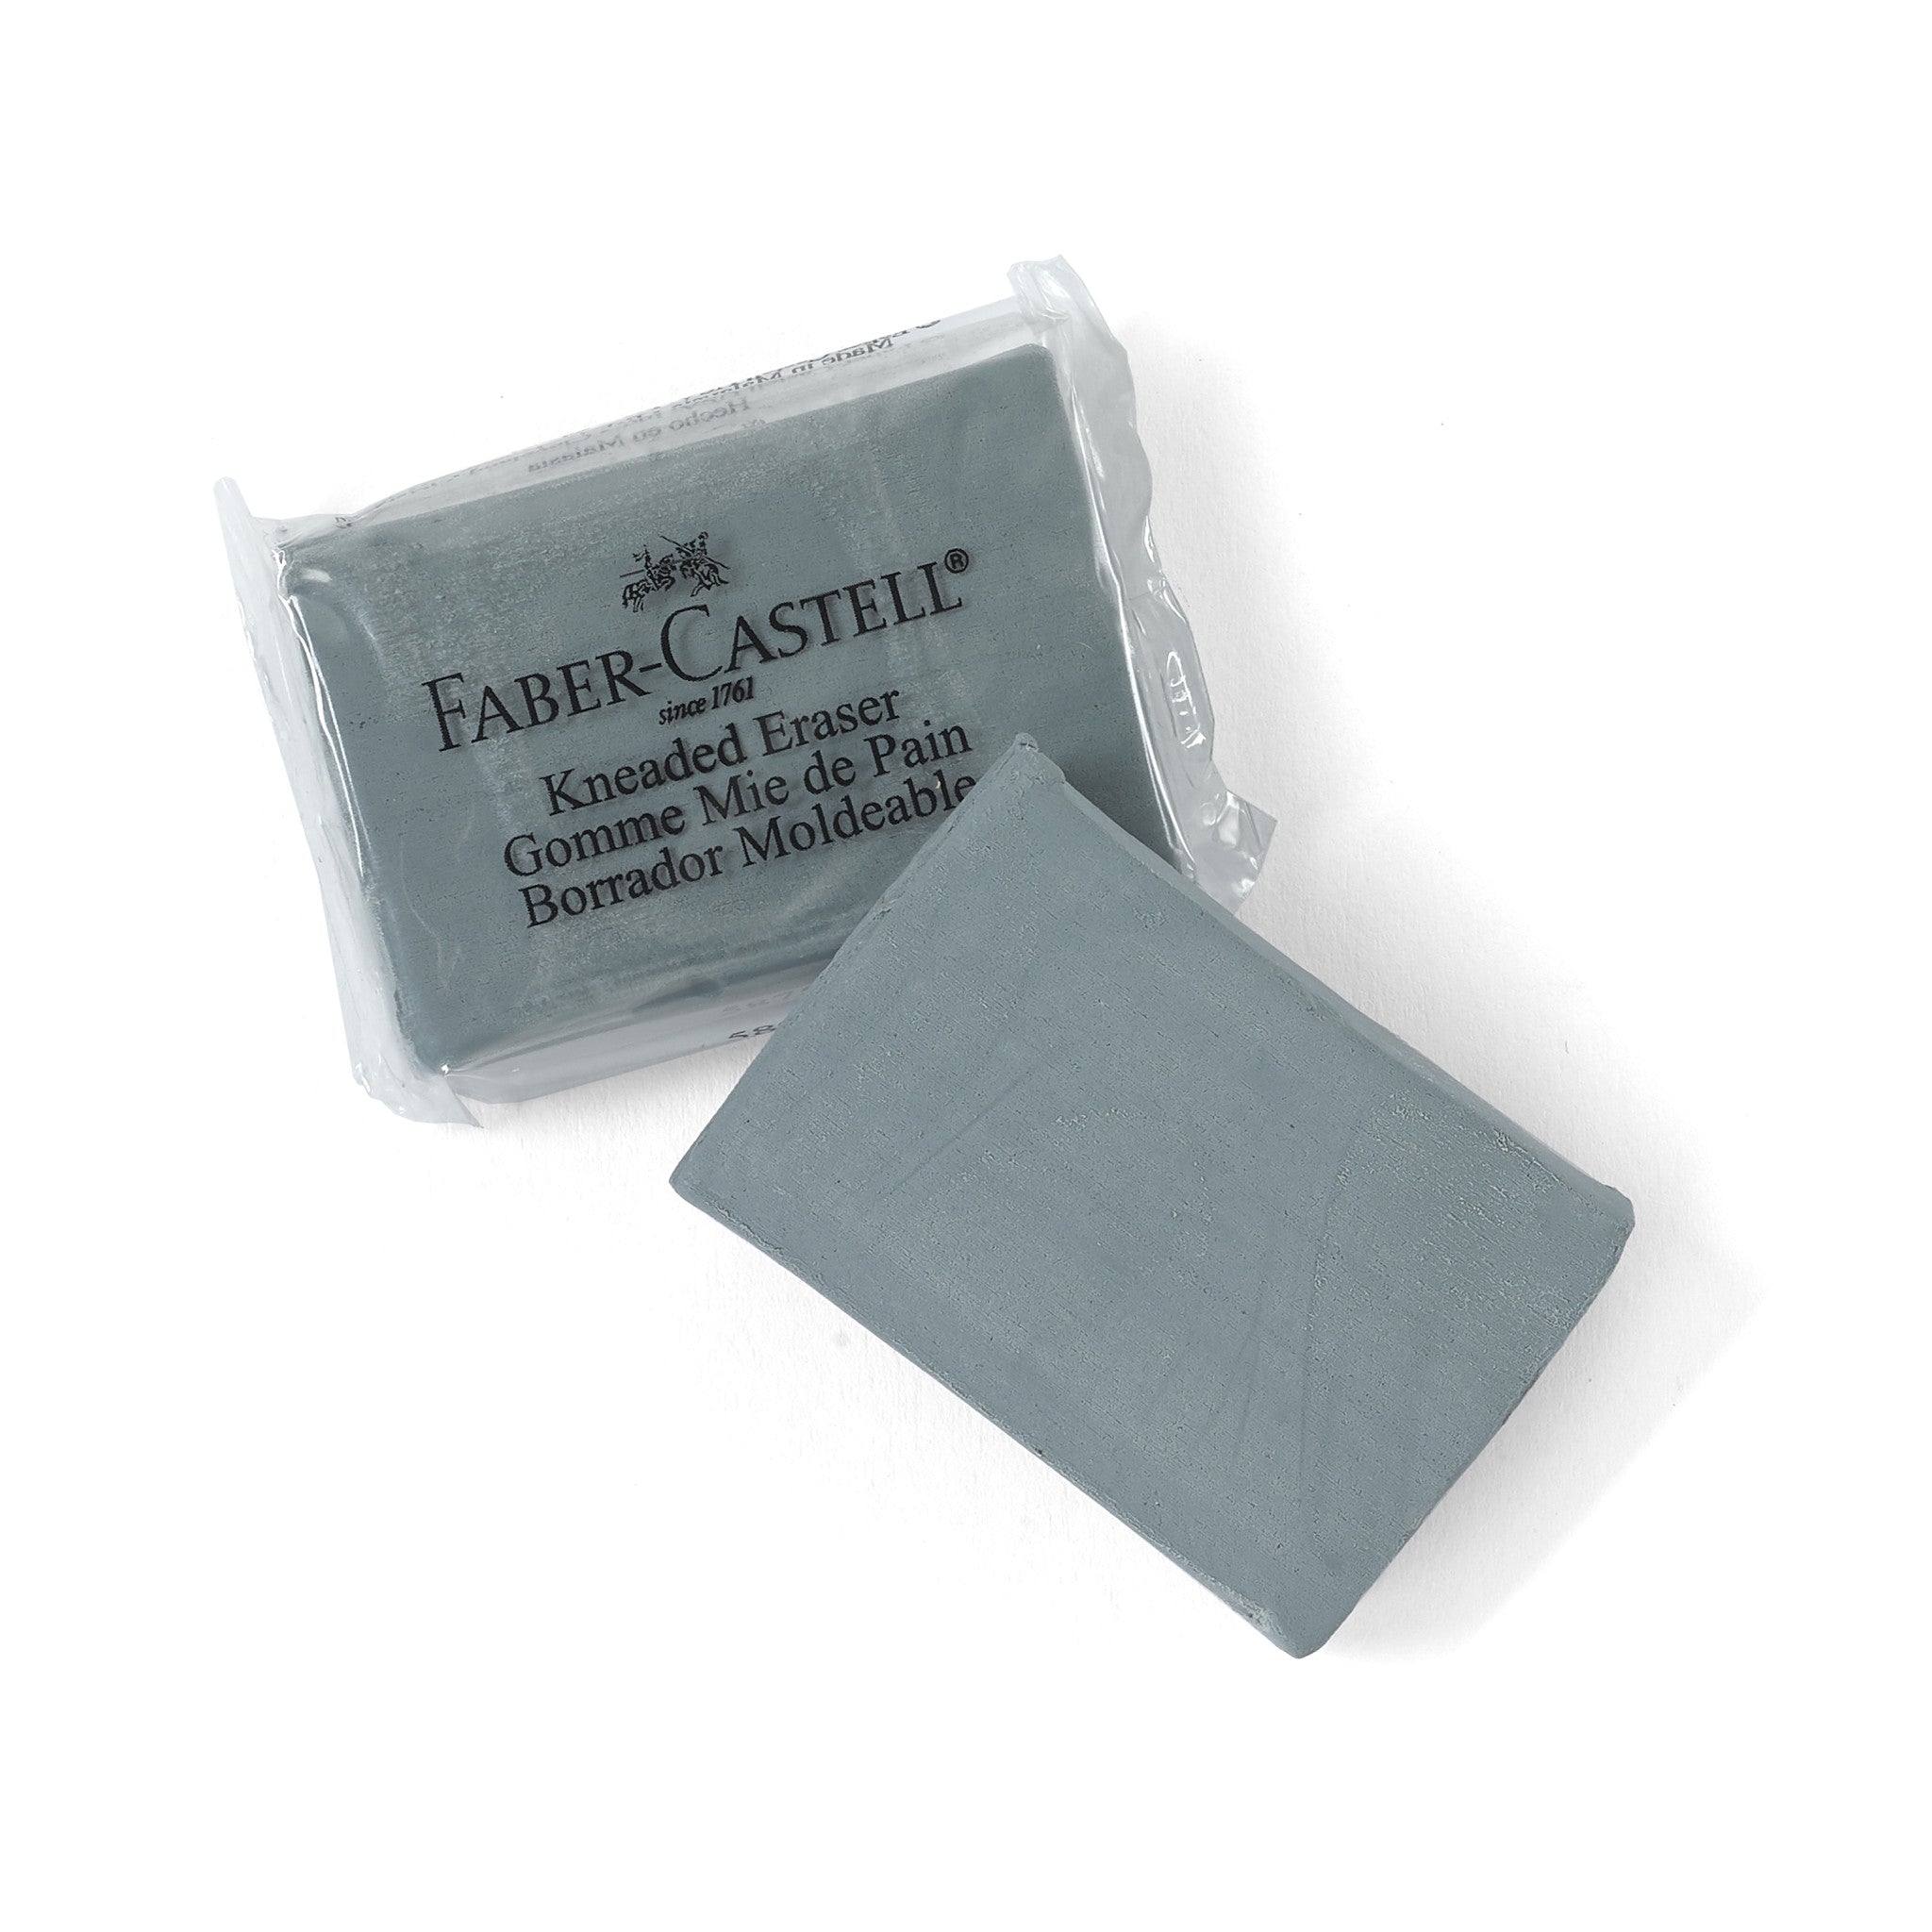 Faber-Castell Kneaded Eraser  HACC - Central Pennsylvania's